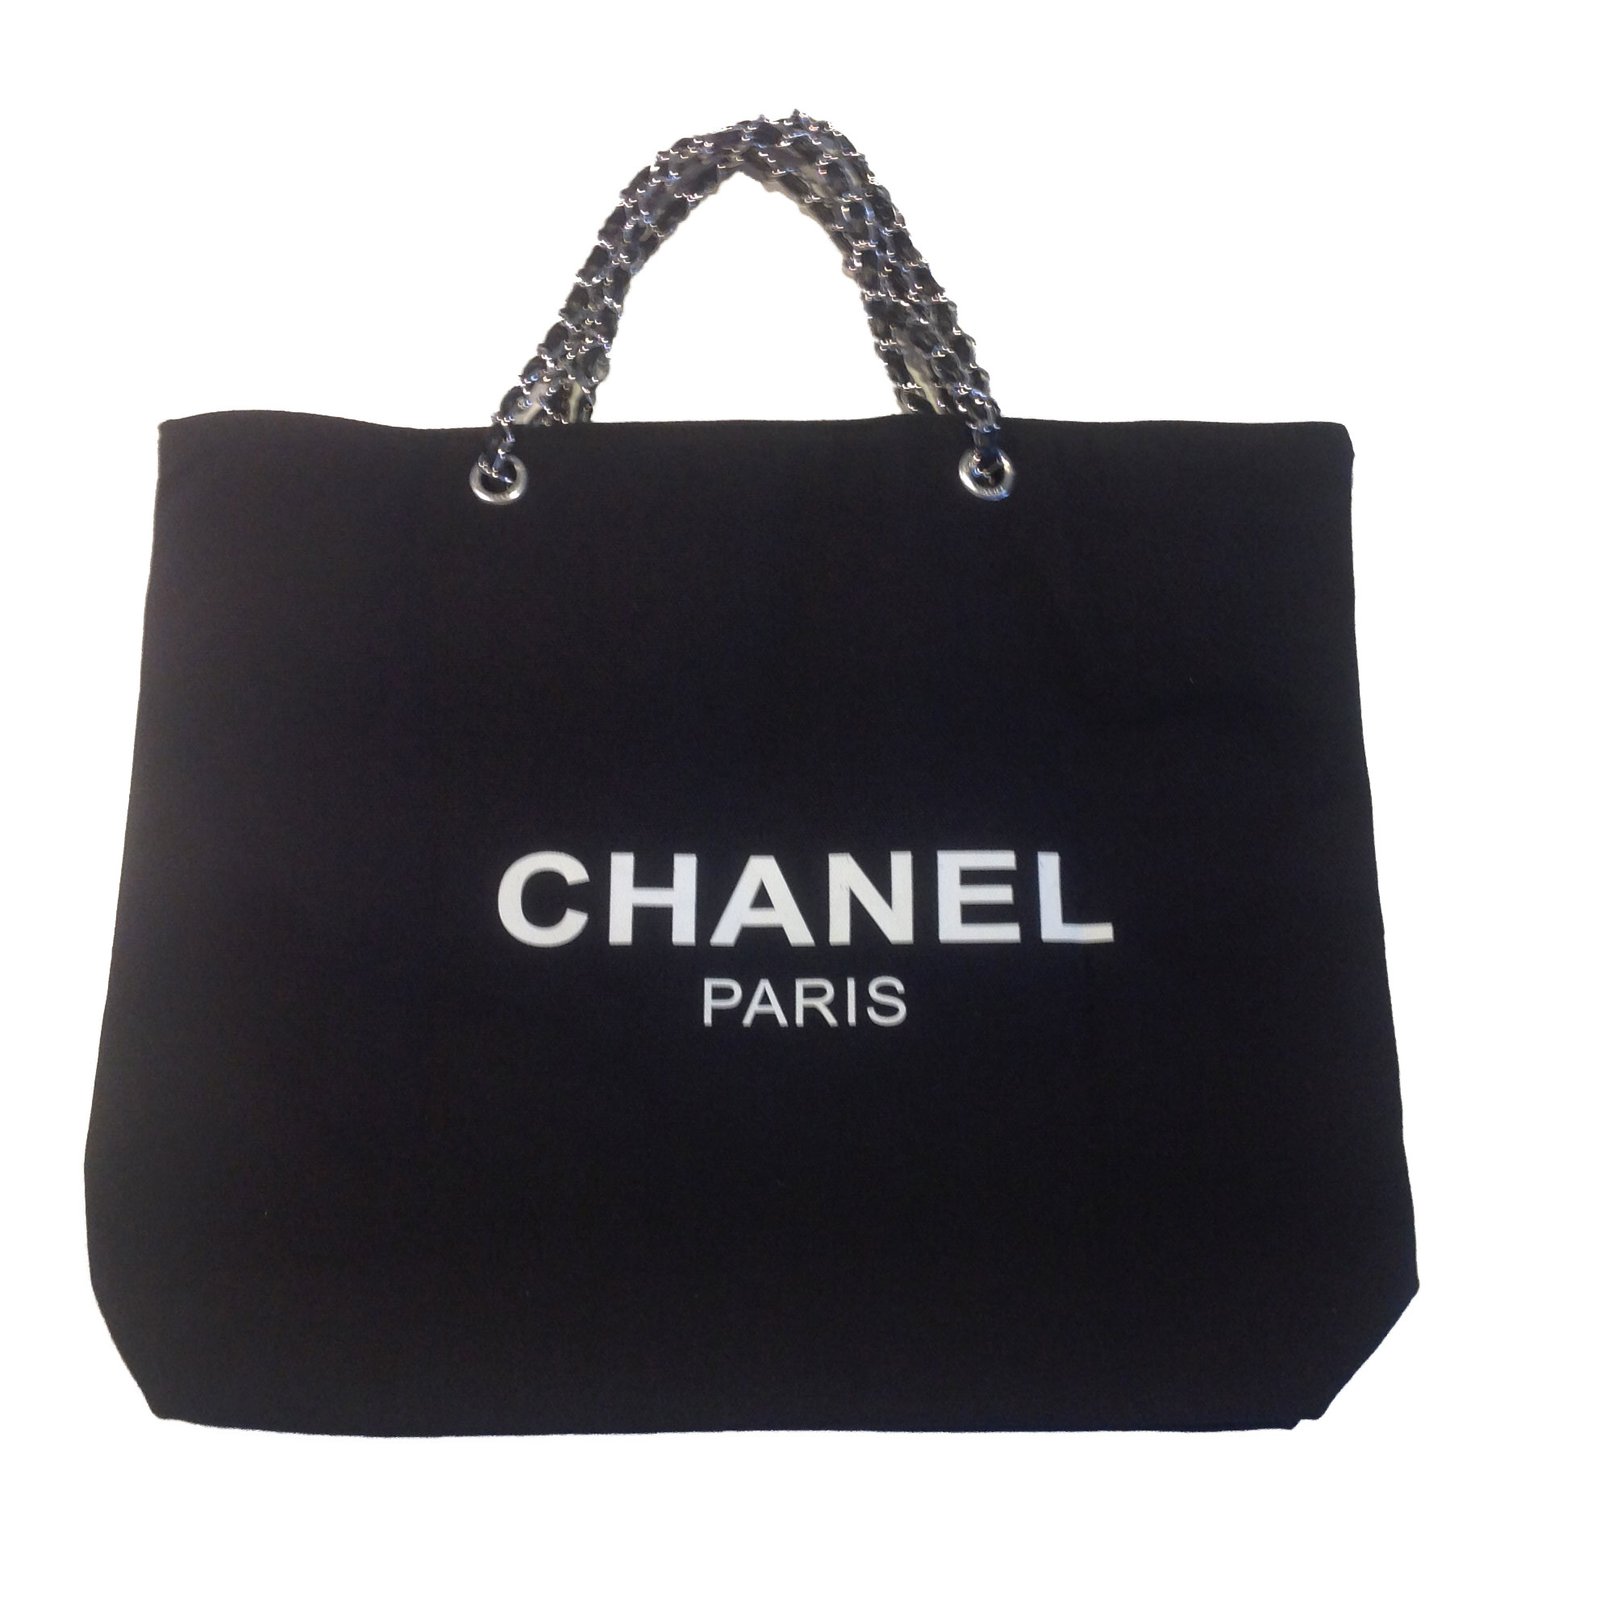 Chanel Chanel vip gift bag tote VIP gifts Other Black ref ...